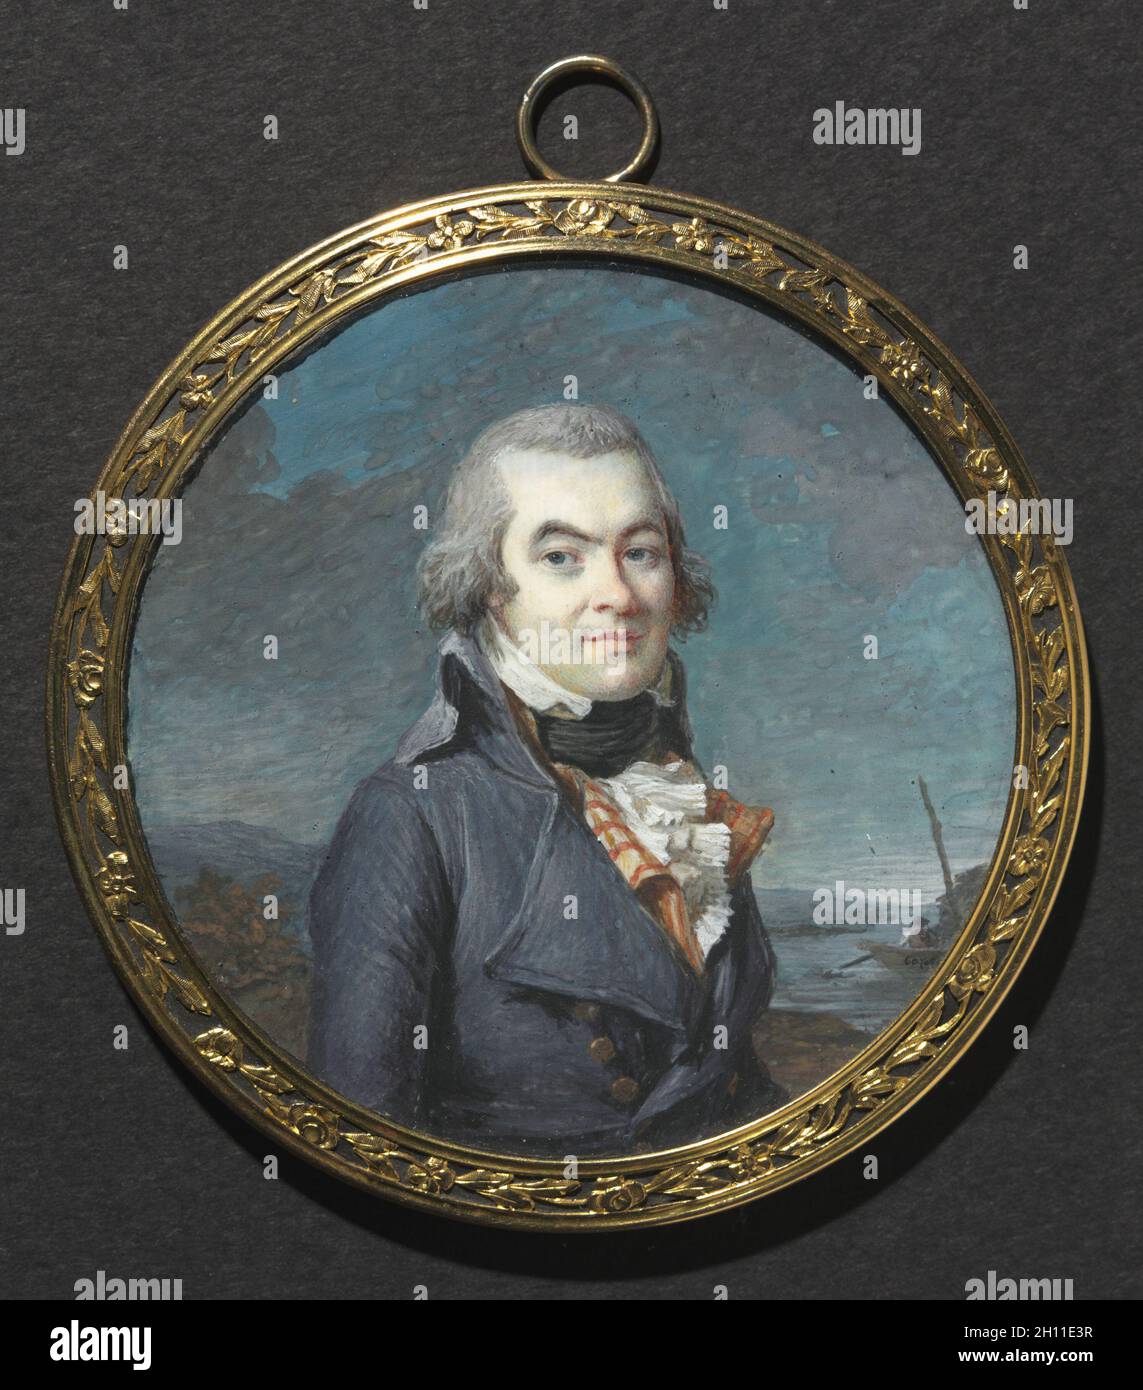 https://c8.alamy.com/comp/2H11E3R/portrait-of-a-man-in-a-landscape-c-1795-marie-gabrielle-capet-french-1761-1818-watercolor-on-ivory-in-a-gold-engraved-frame-probably-converted-from-a-snuffbox-with-a-blue-corded-silk-back-diameter-67-cm-2-58-in-diameter-of-frame-78-cm-3-116-in-2H11E3R.jpg